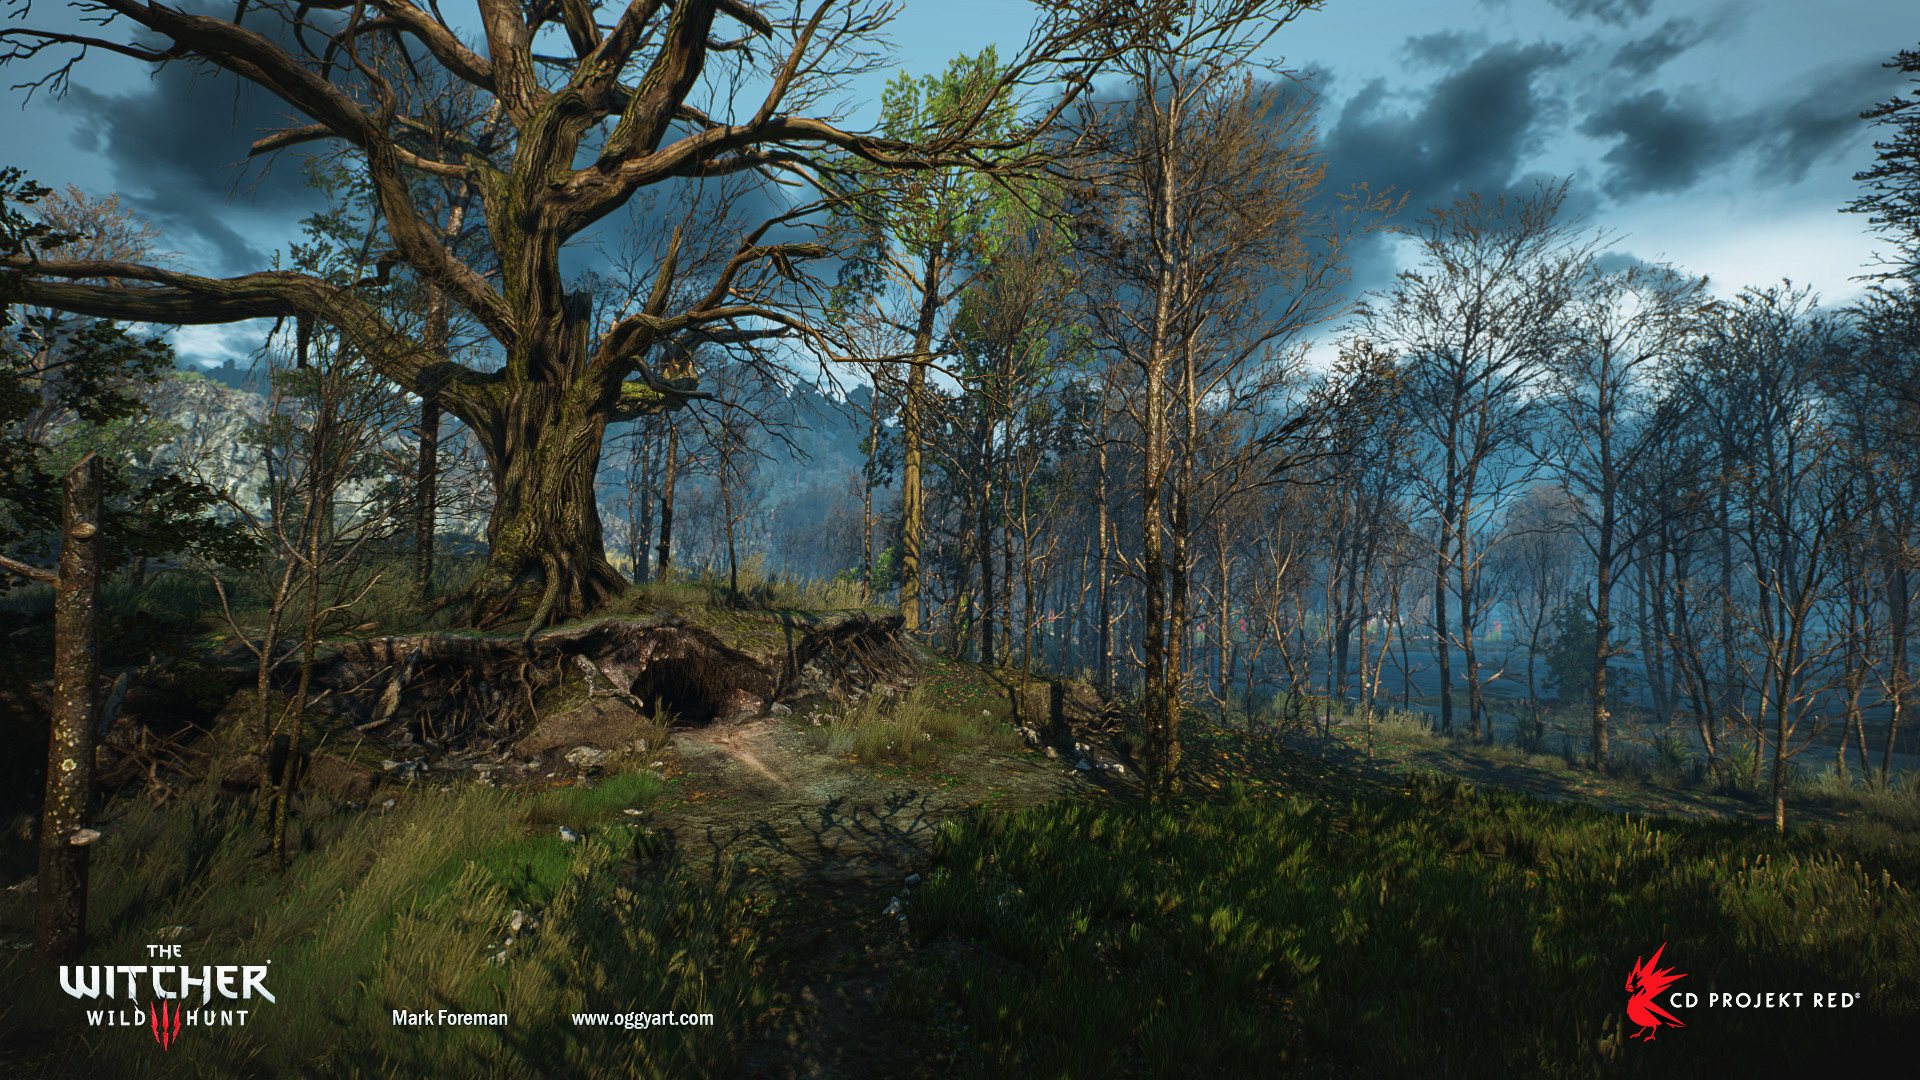 Trees The Witcher 3 Wild Hunt Wallpaper - Witcher - HD Wallpaper 